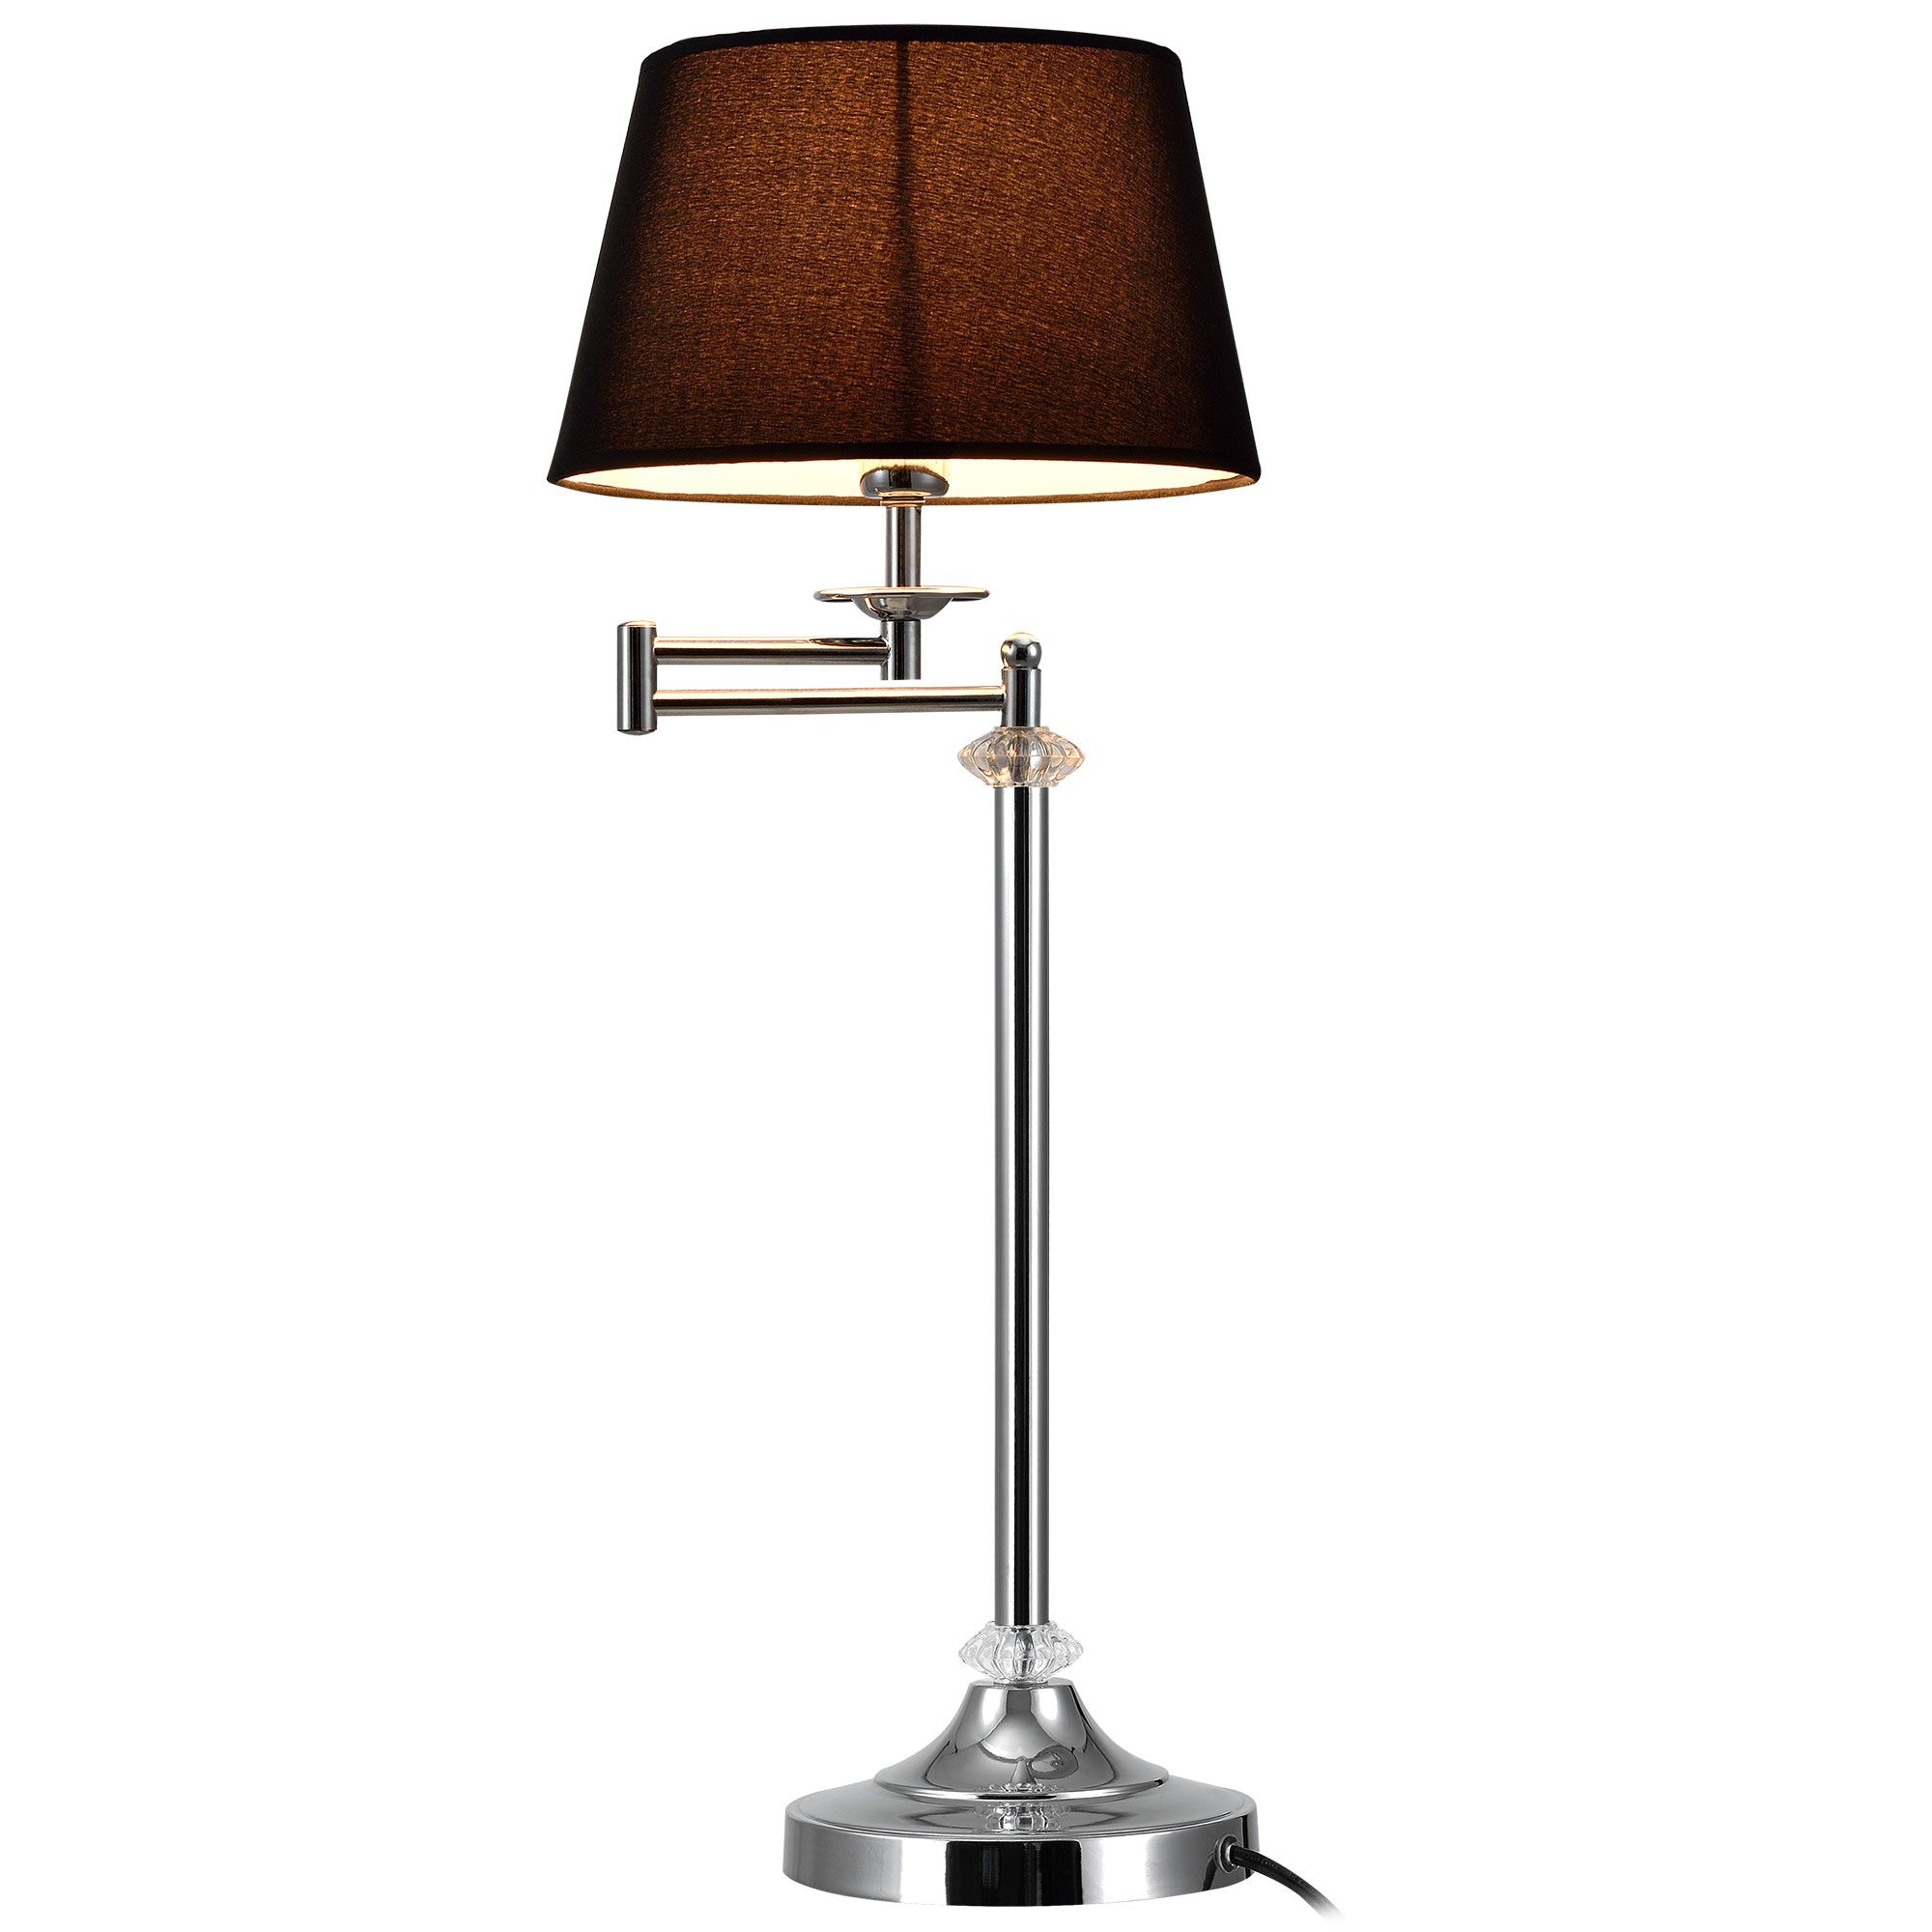 [lux.pro] Stolní lampa \"Swing\" HT167771 - H.T. Trade Service GmbH & Co. KG